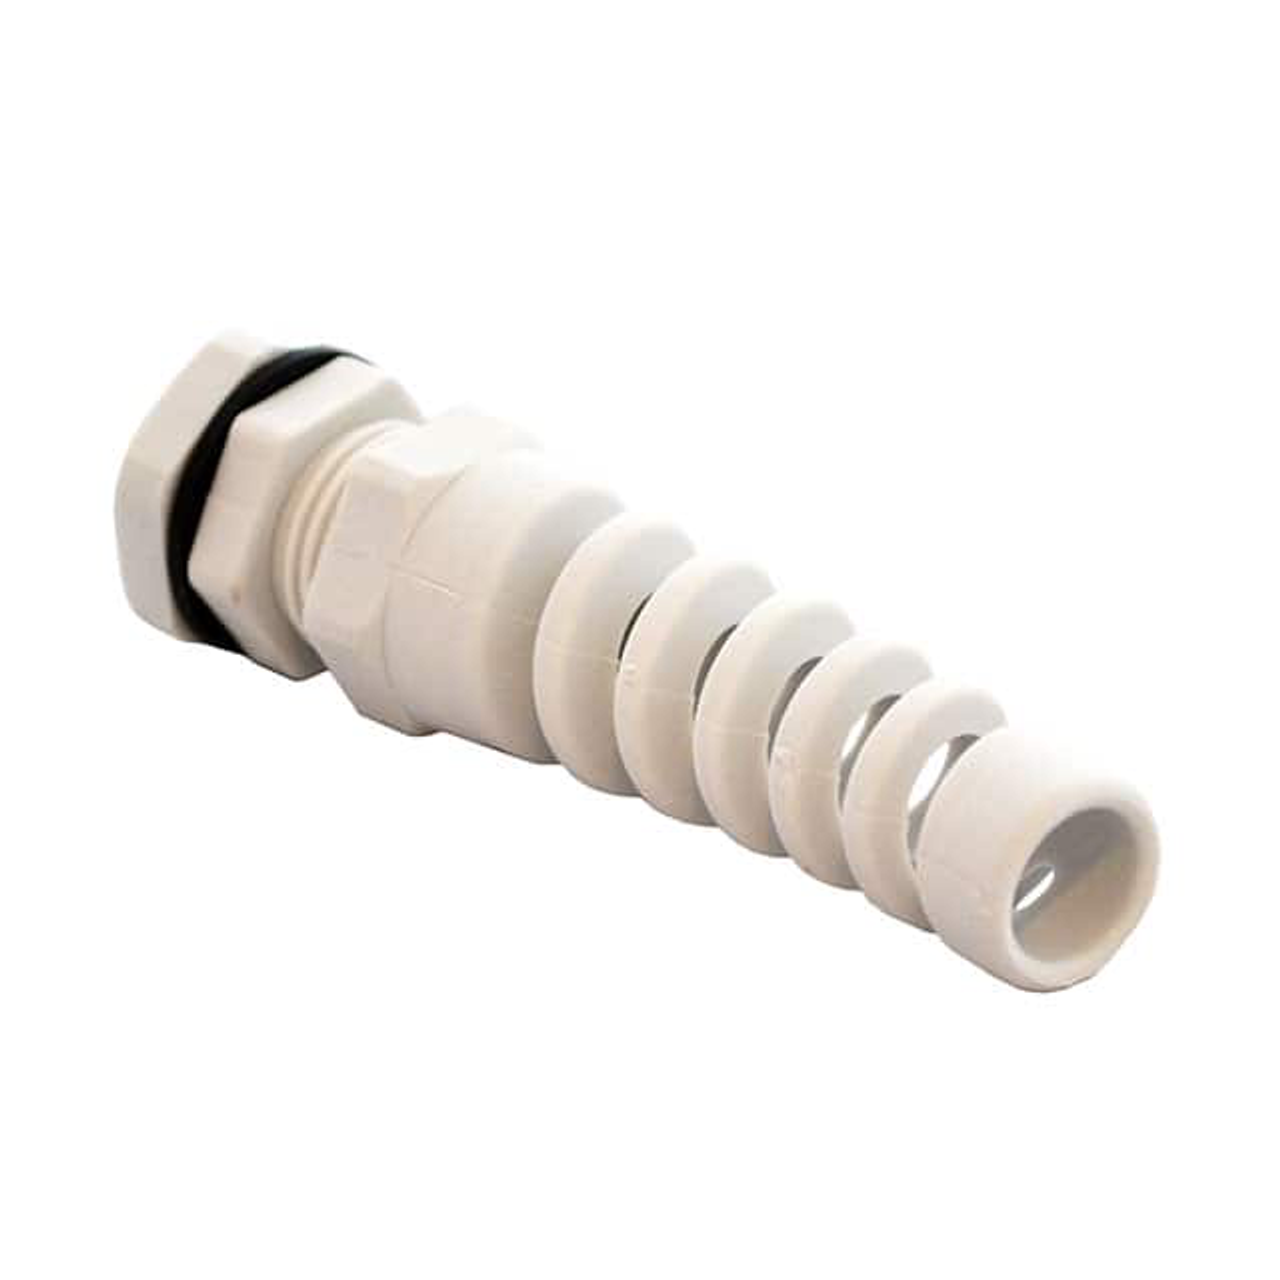 Bud Industries Inc. IPG-22211-BPG Cable Glands